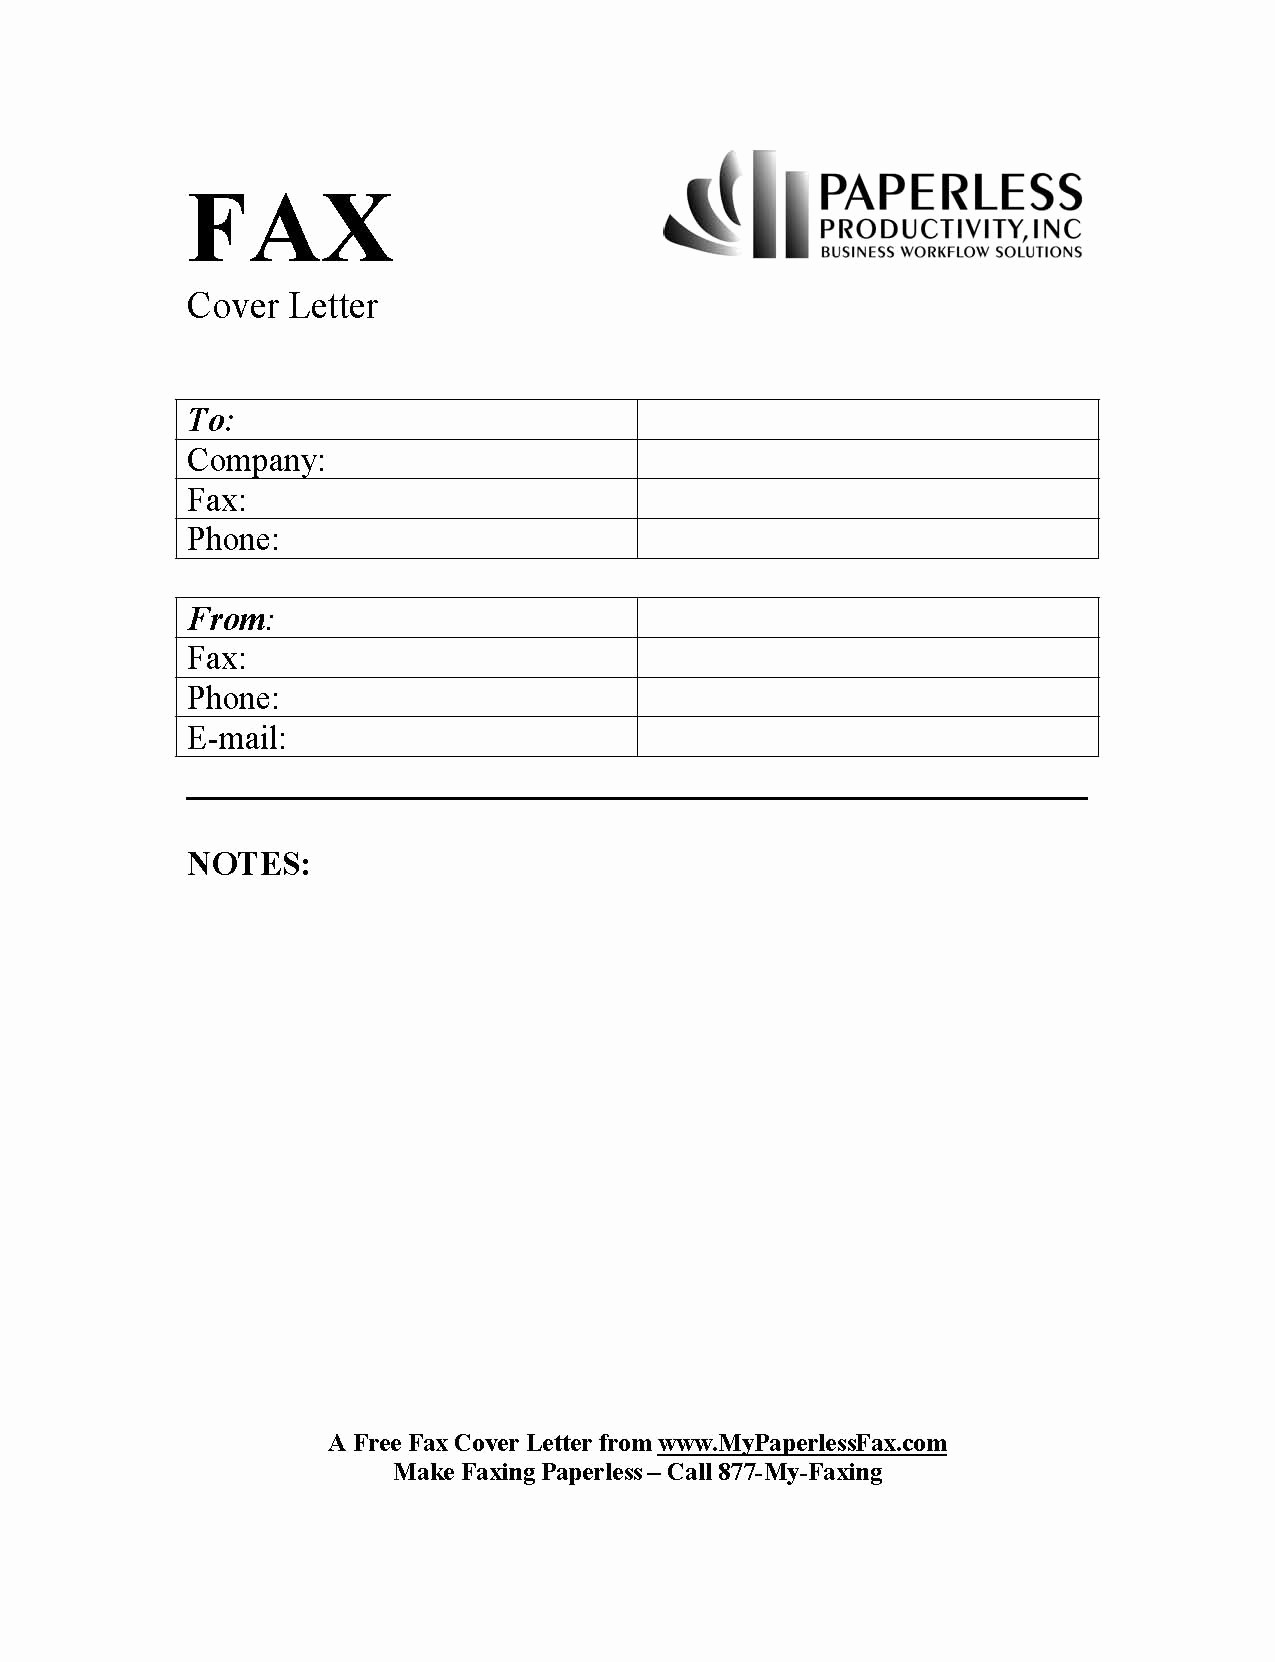 Fax Cover Sheet Microsoft Office Awesome Microsoft Fice Fax Template Gallery Template Design Ideas